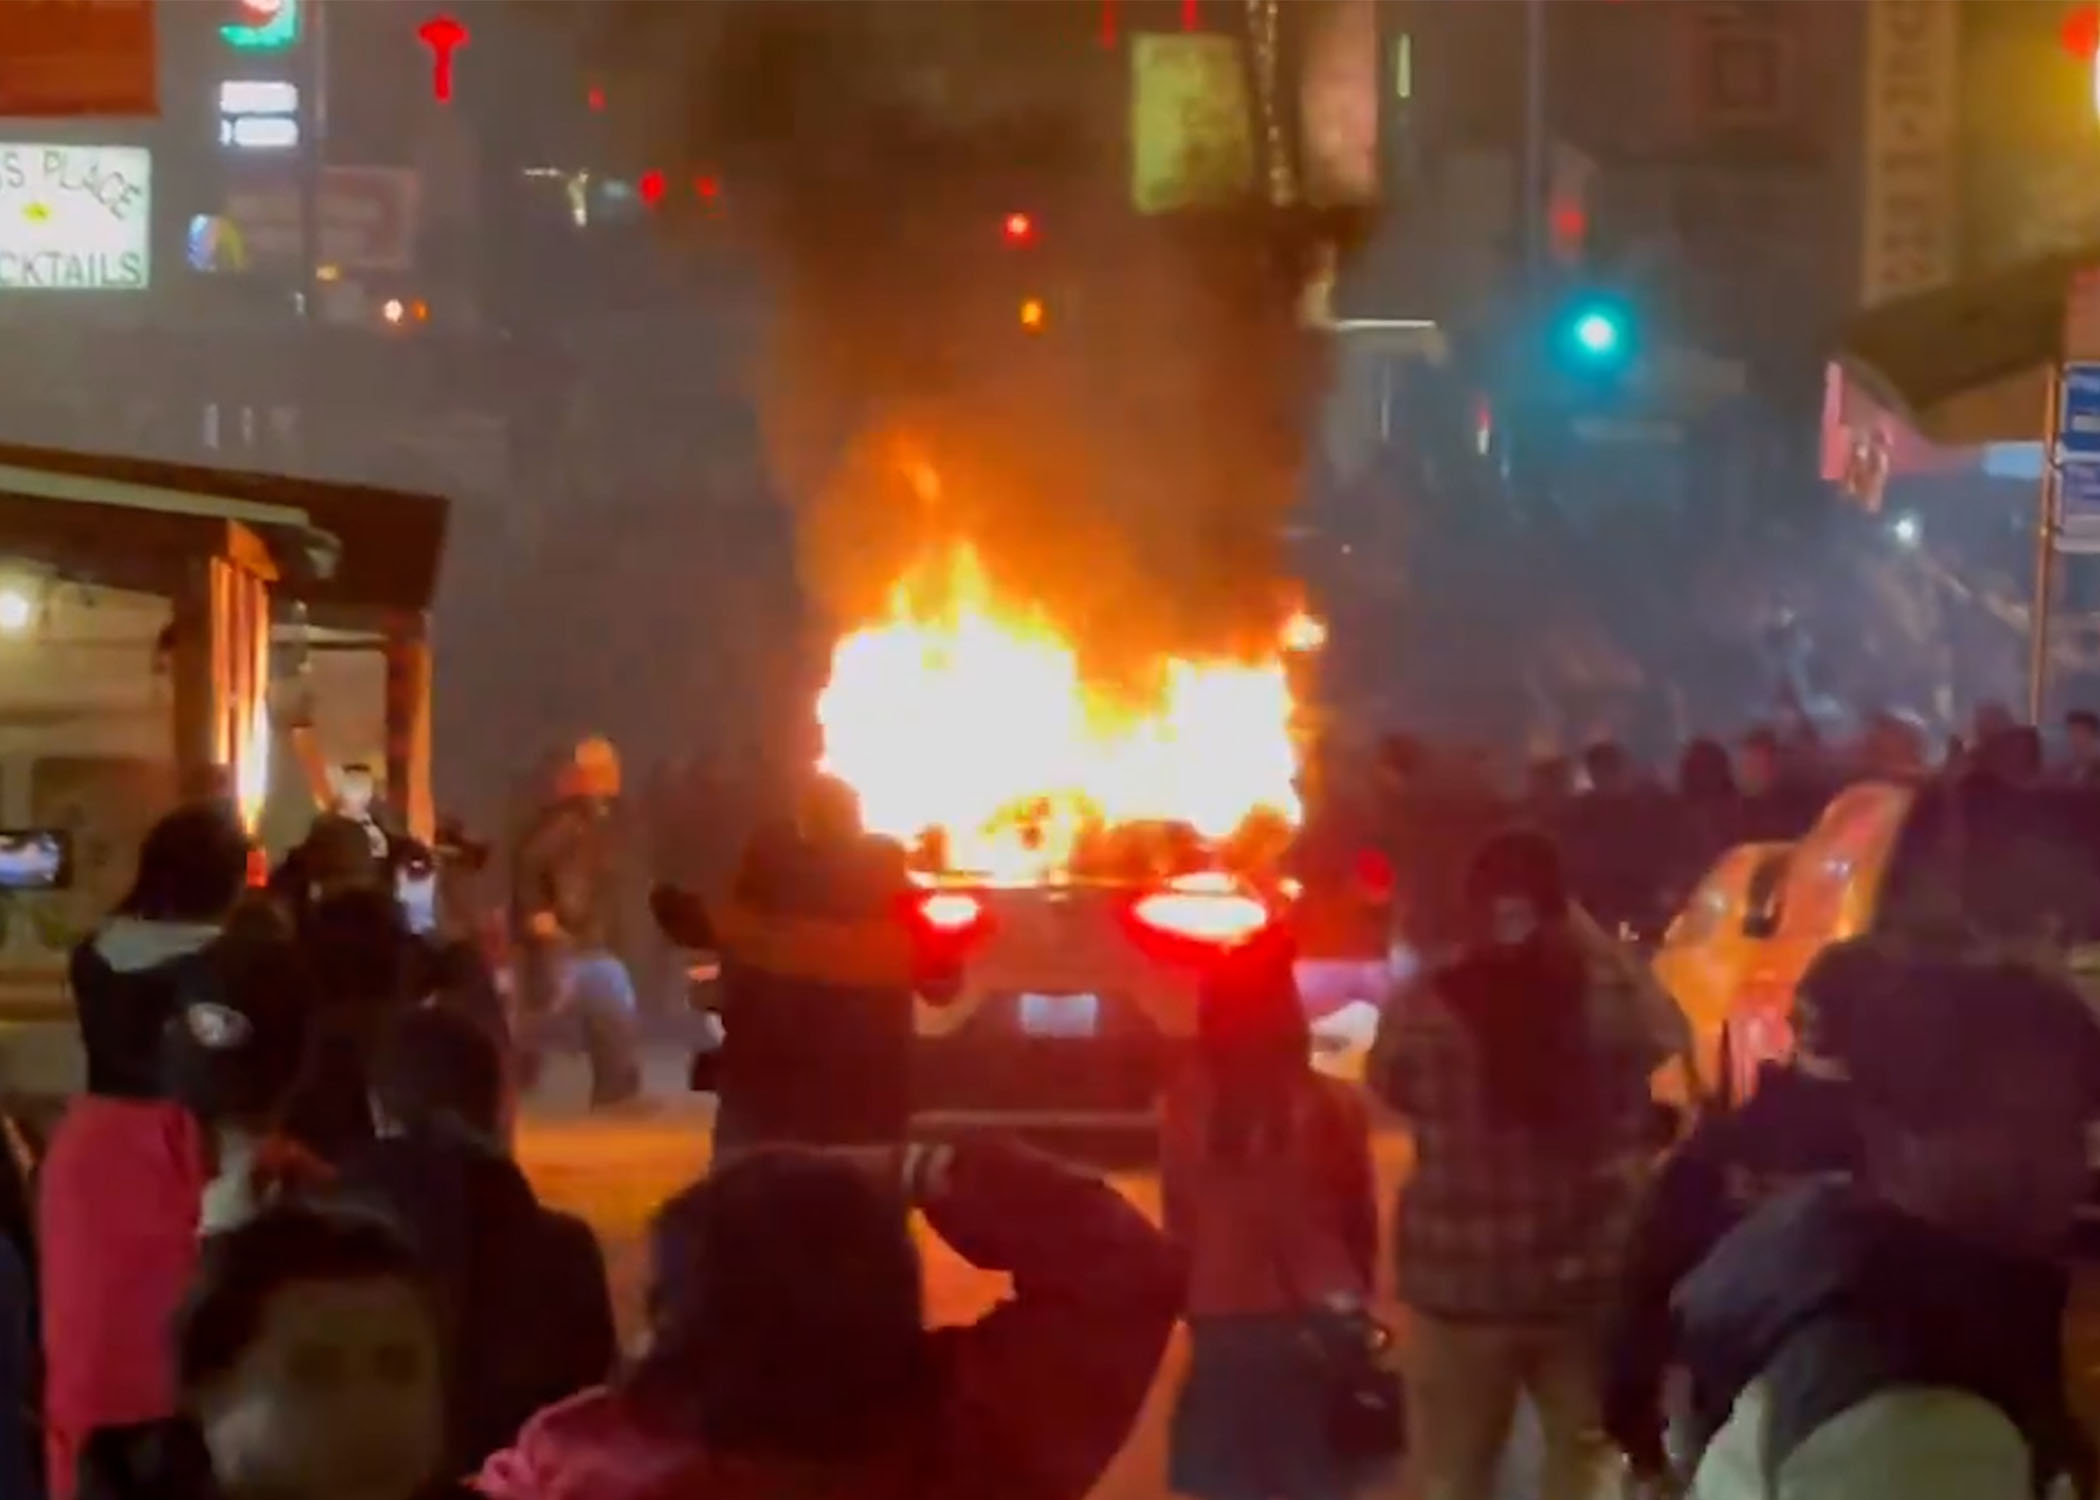 A car is engulfed in flames on a street at night, with onlookers capturing the scene on their phones.